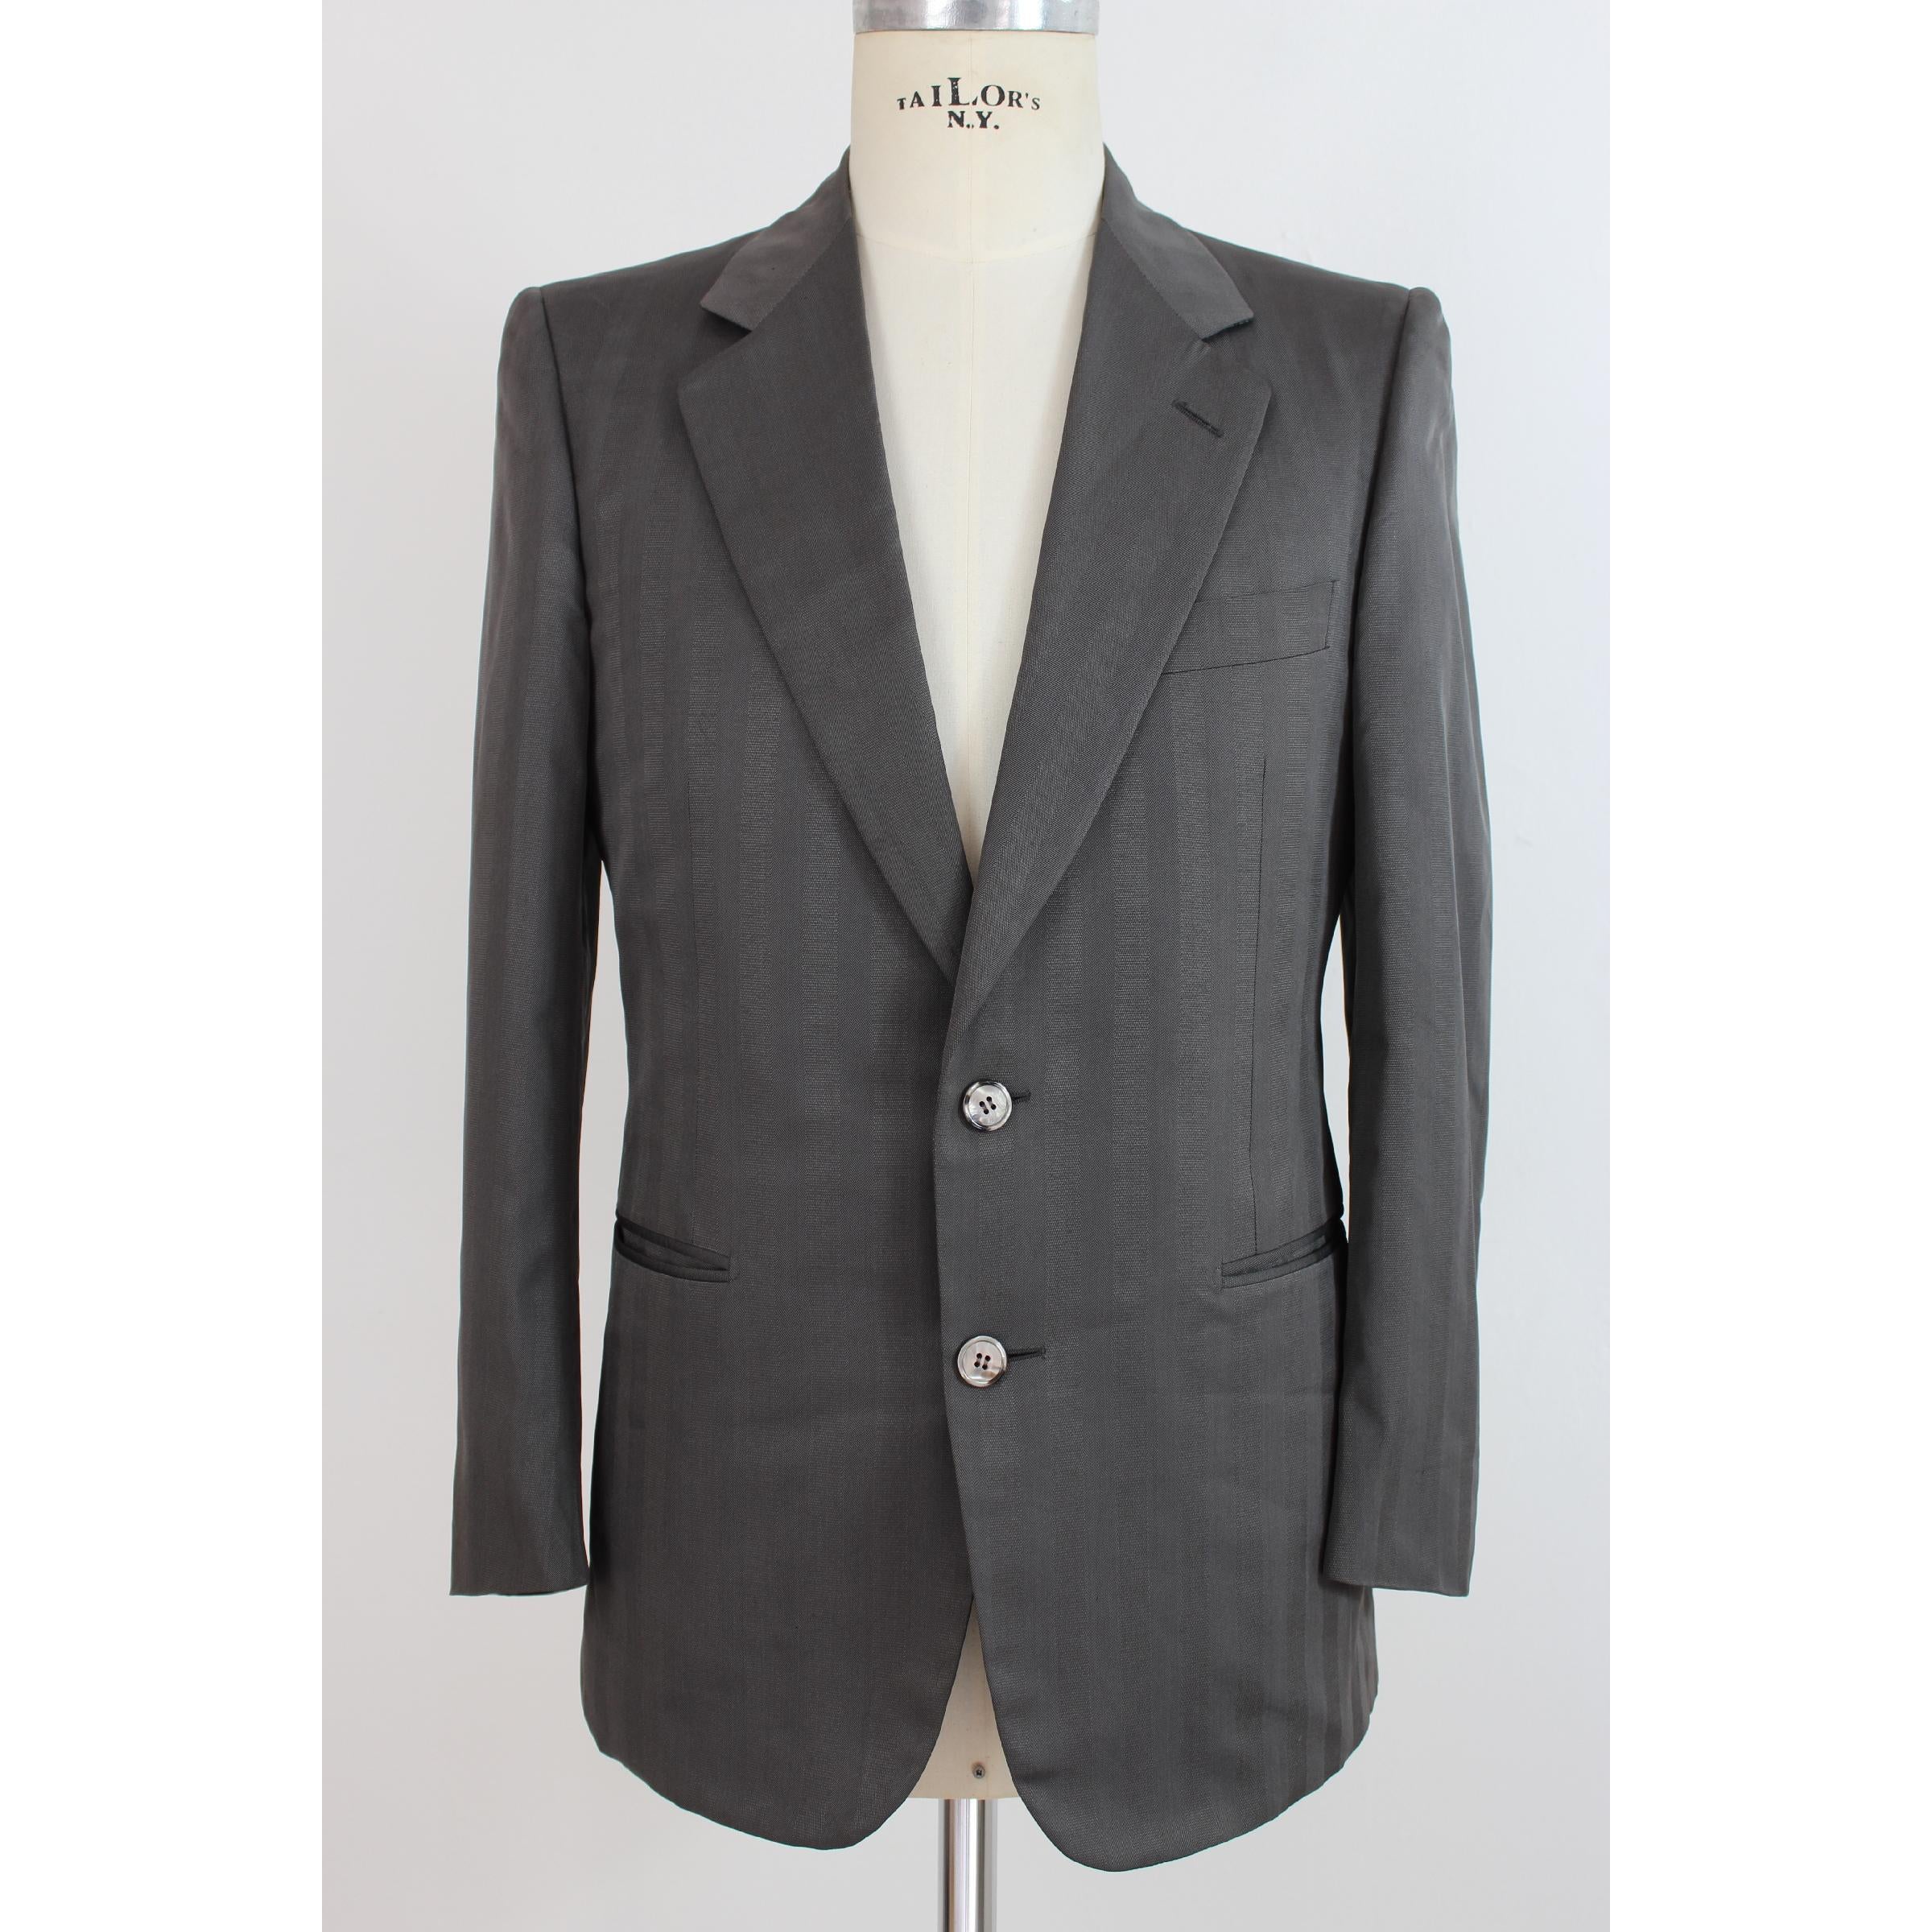 Christian Dior Monsieur vintage men's jacket, 1980s, 100% silk, light gray color. Mother of pearl buttons. Made in Italy. Excellent vintage conditions.

Size: 46 It 36 Us 36 Uk

Shoulder: 46 cm
Bust / Chest: 50 cm
Sleeve: 60 cm
Length: 81 cm